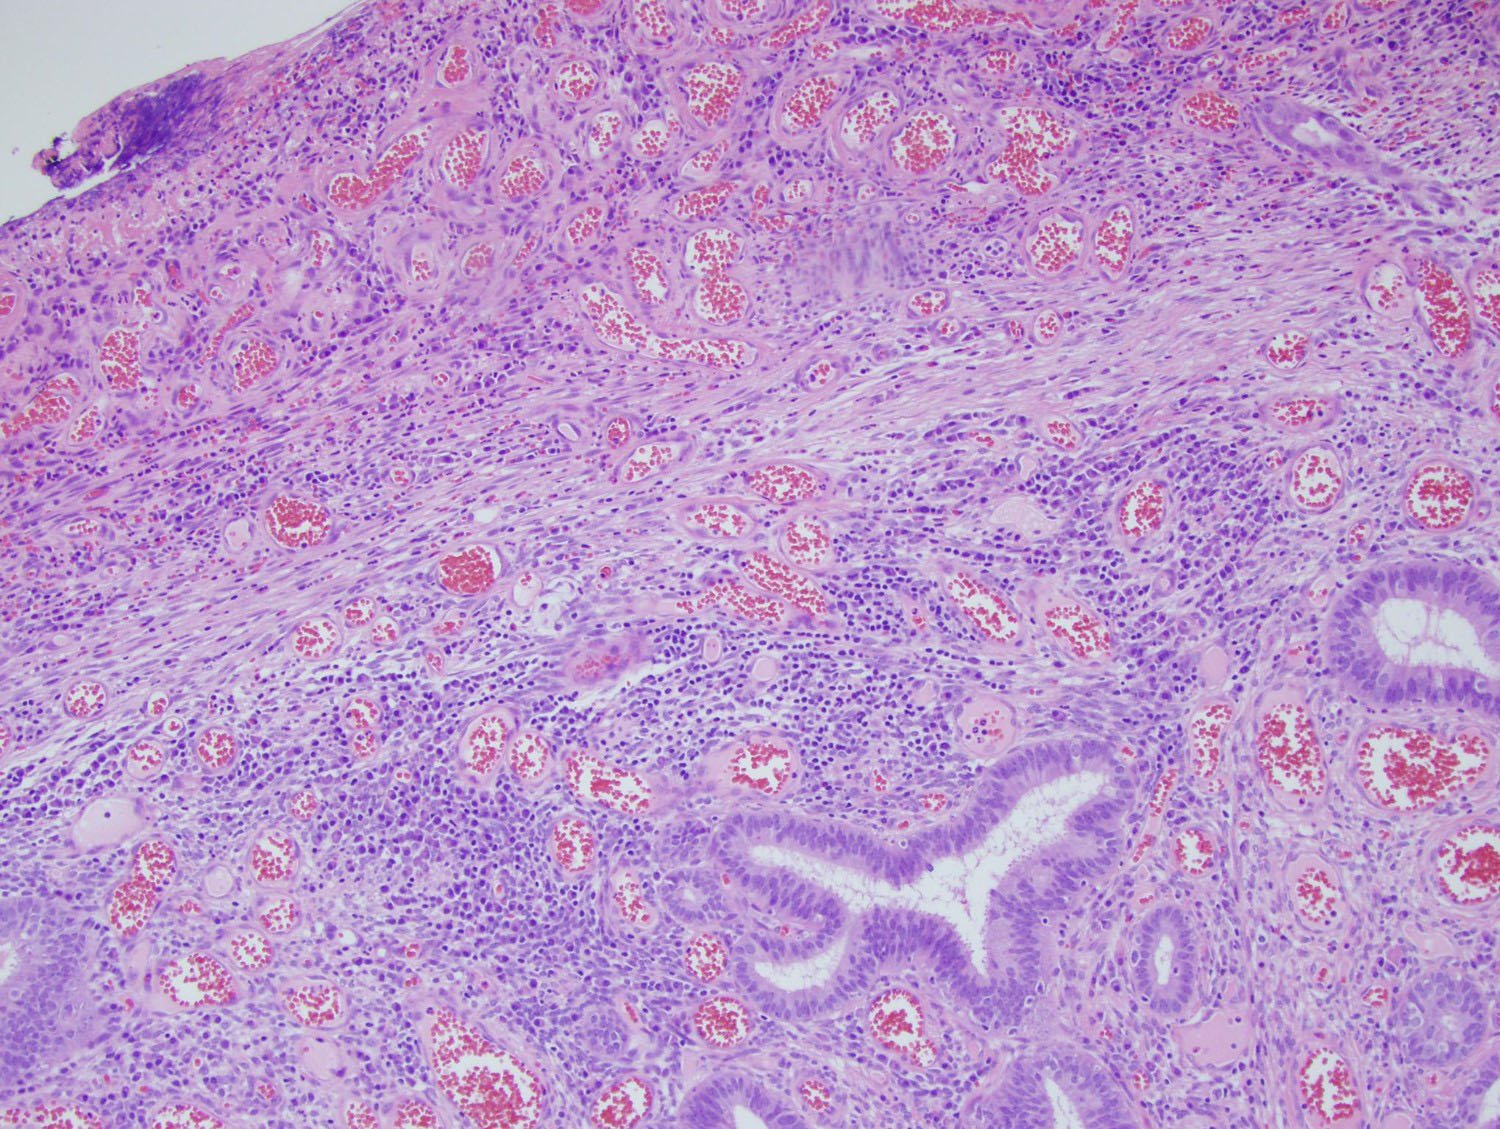 Figure 3 (100x): Sigmoid polyp showing angulated glands with surrounding spindle cell stroma and inflammatory infiltrate